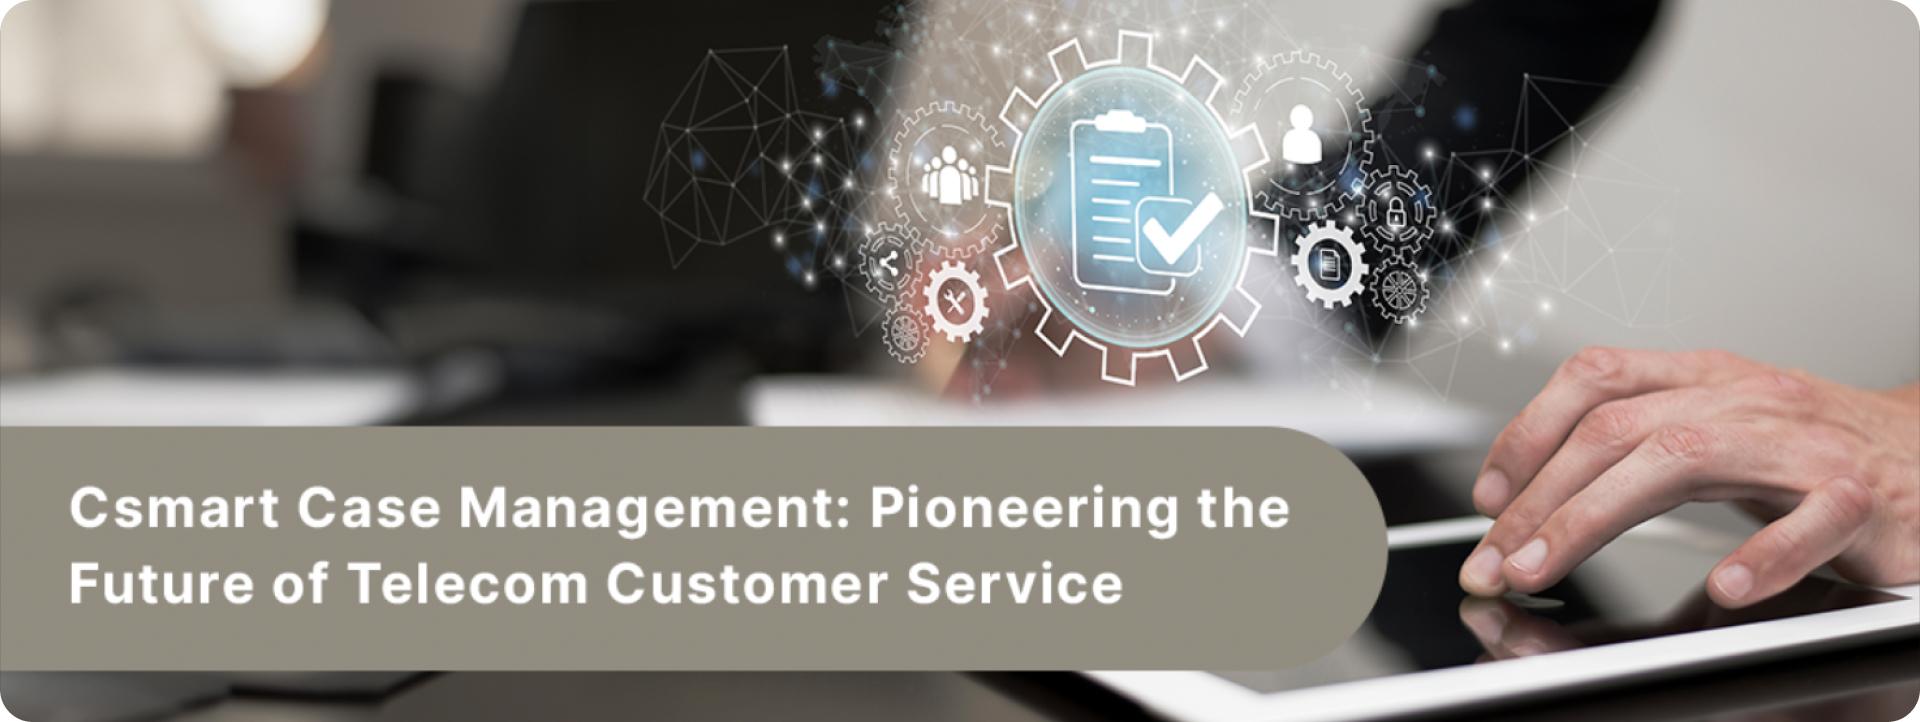 Case Management: Pioneering the Future of Customer Service